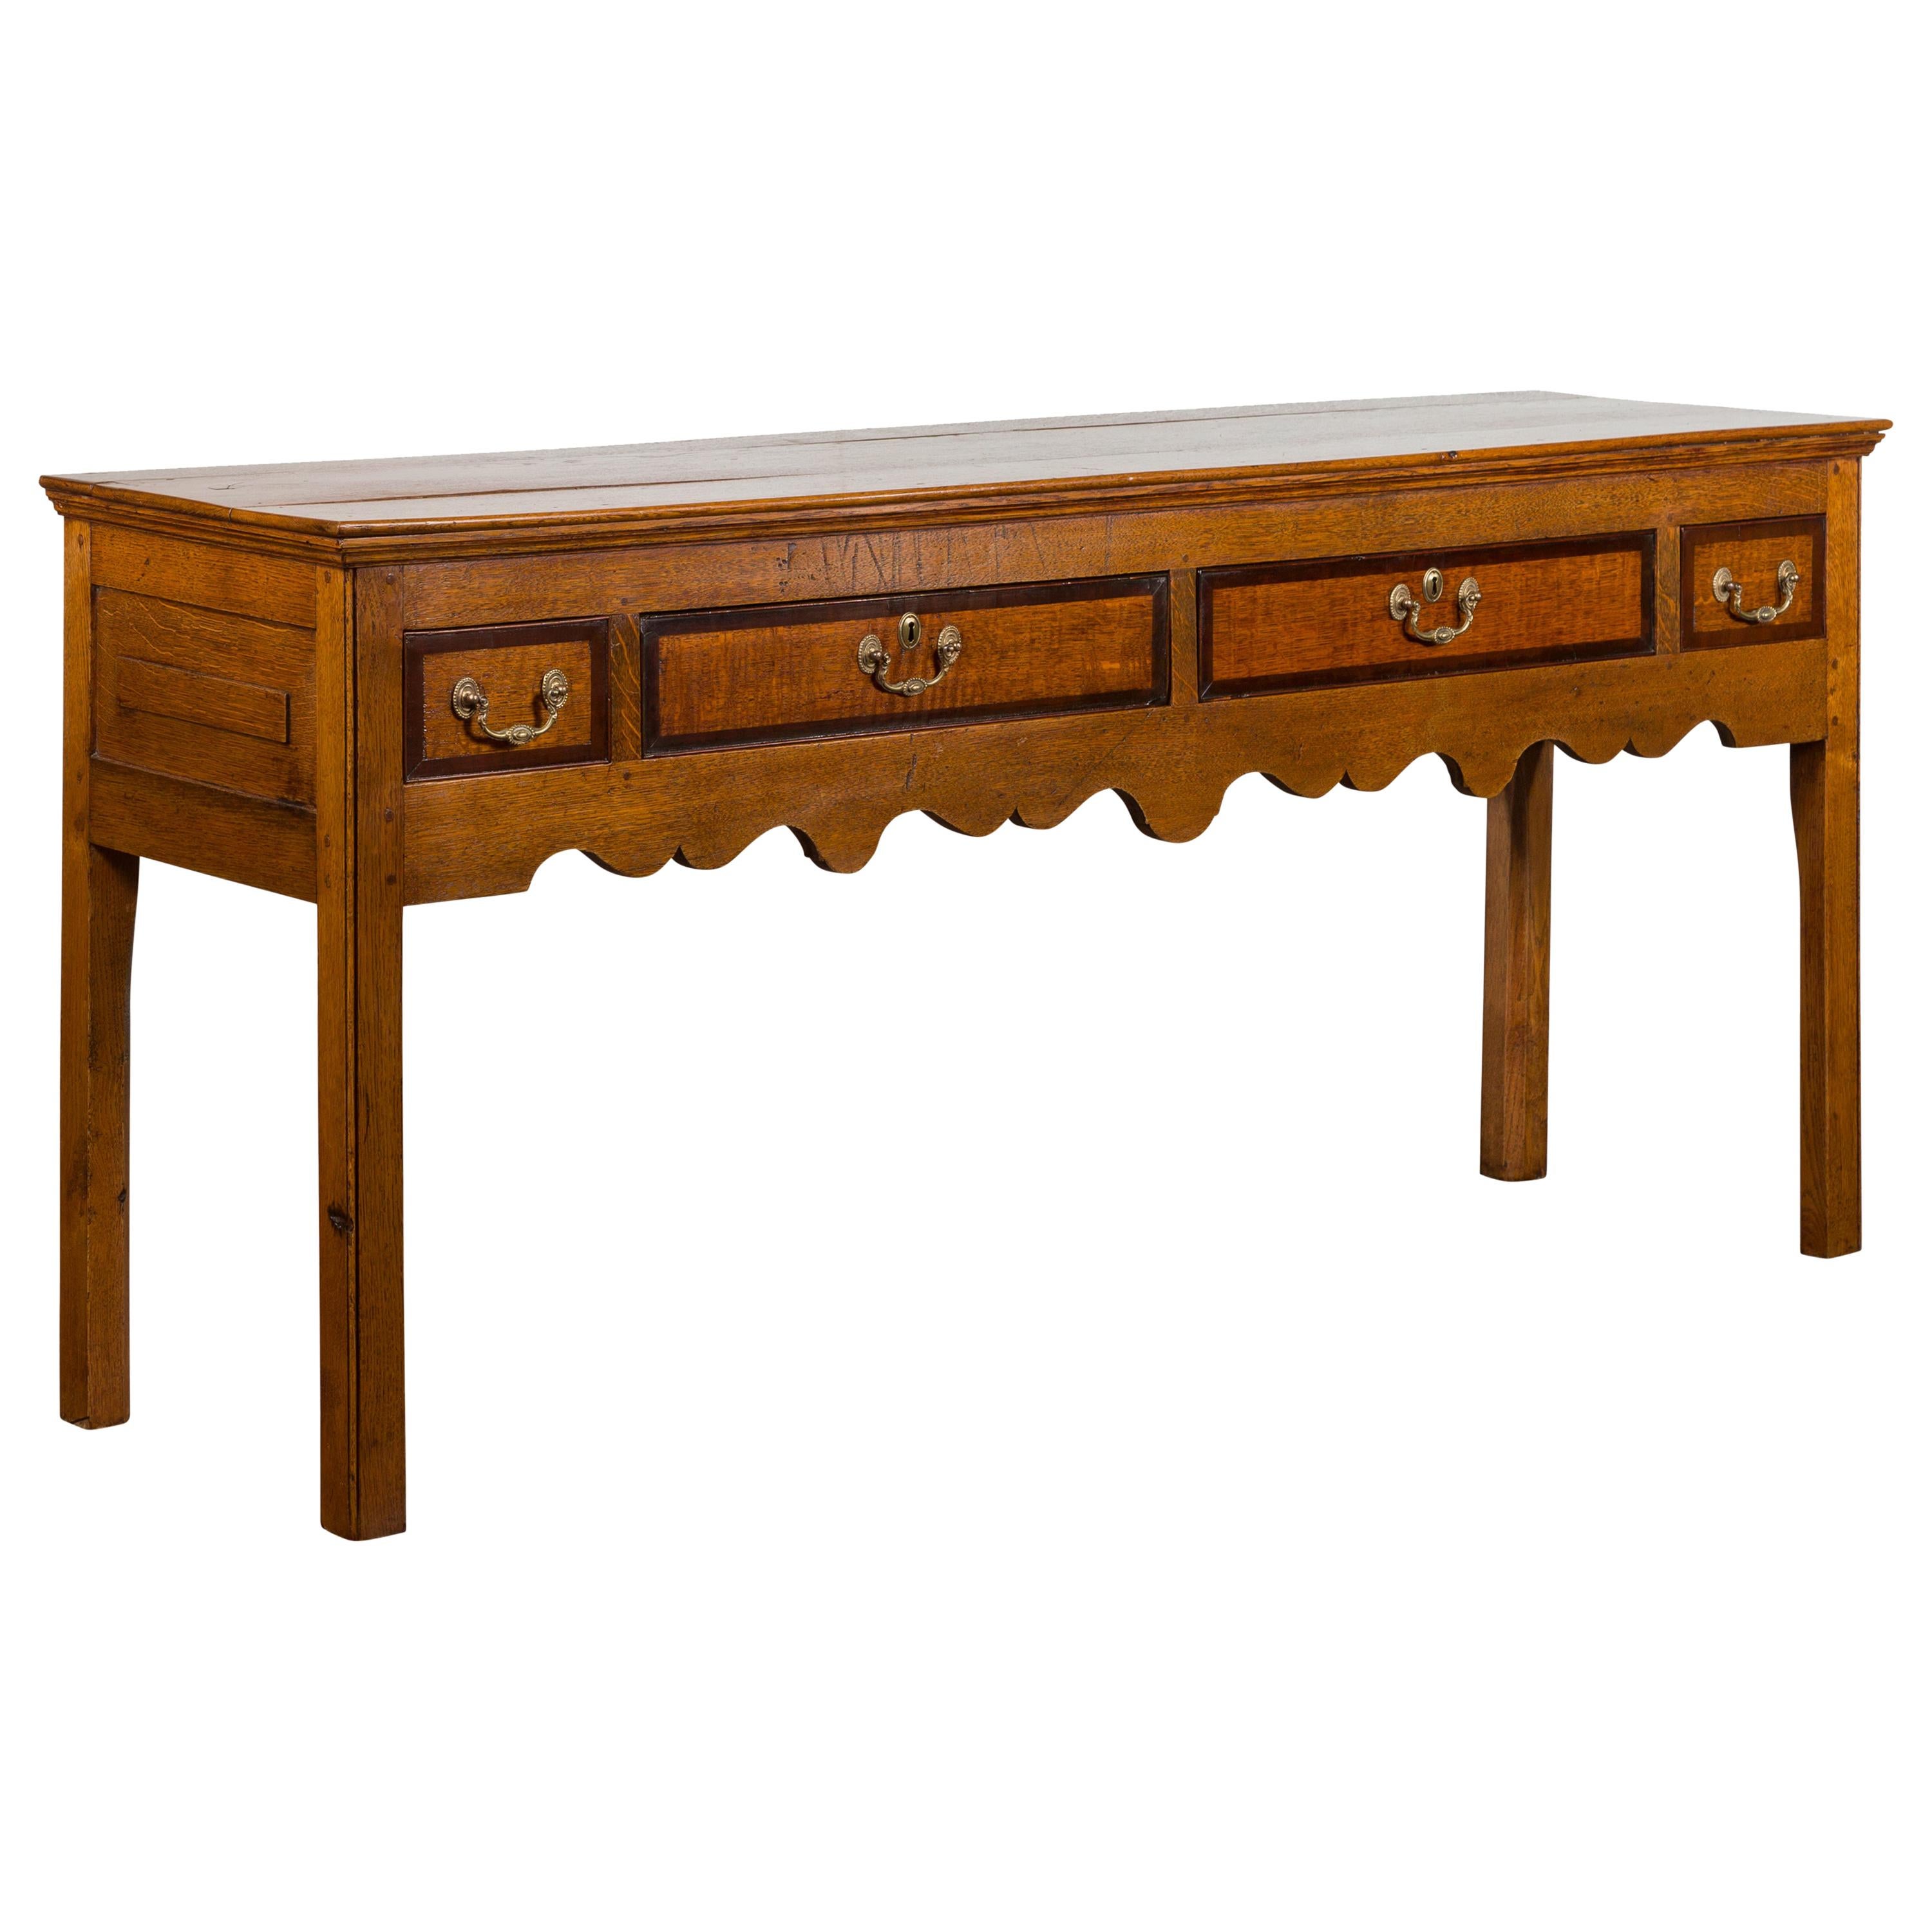 English 1870s Oak Dresser Base with Two-Toned Drawers and Scalloped Apron